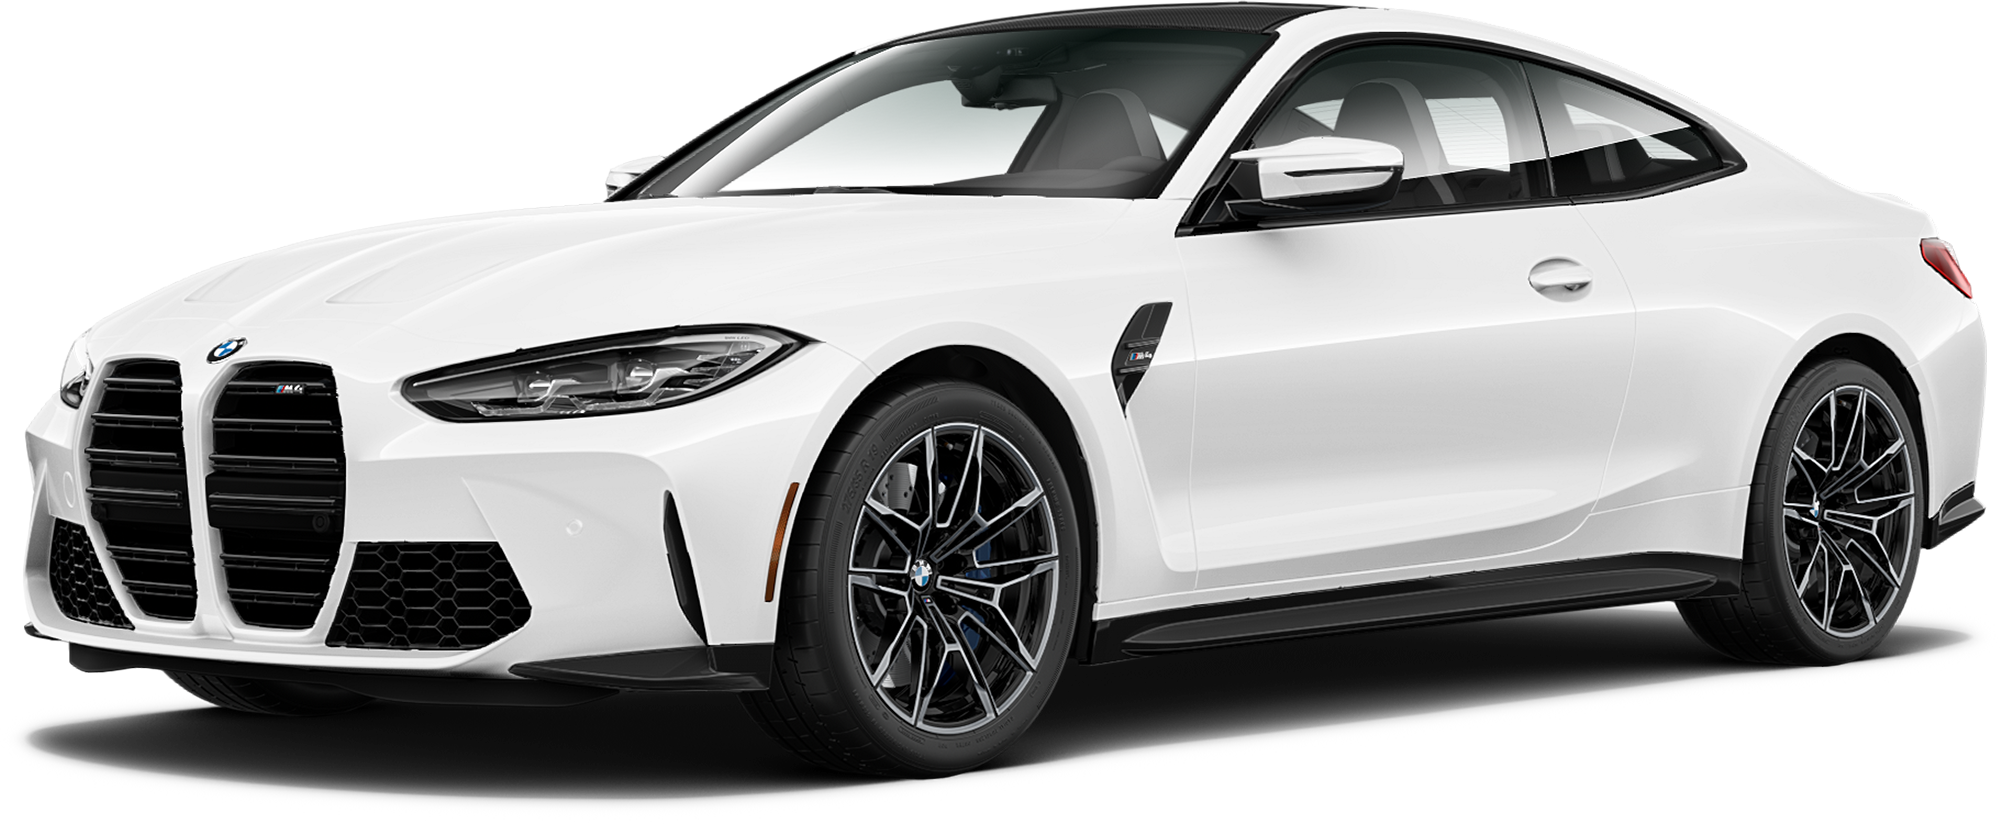 2022 BMW M4 Incentives, Specials & Offers in Dallas TX